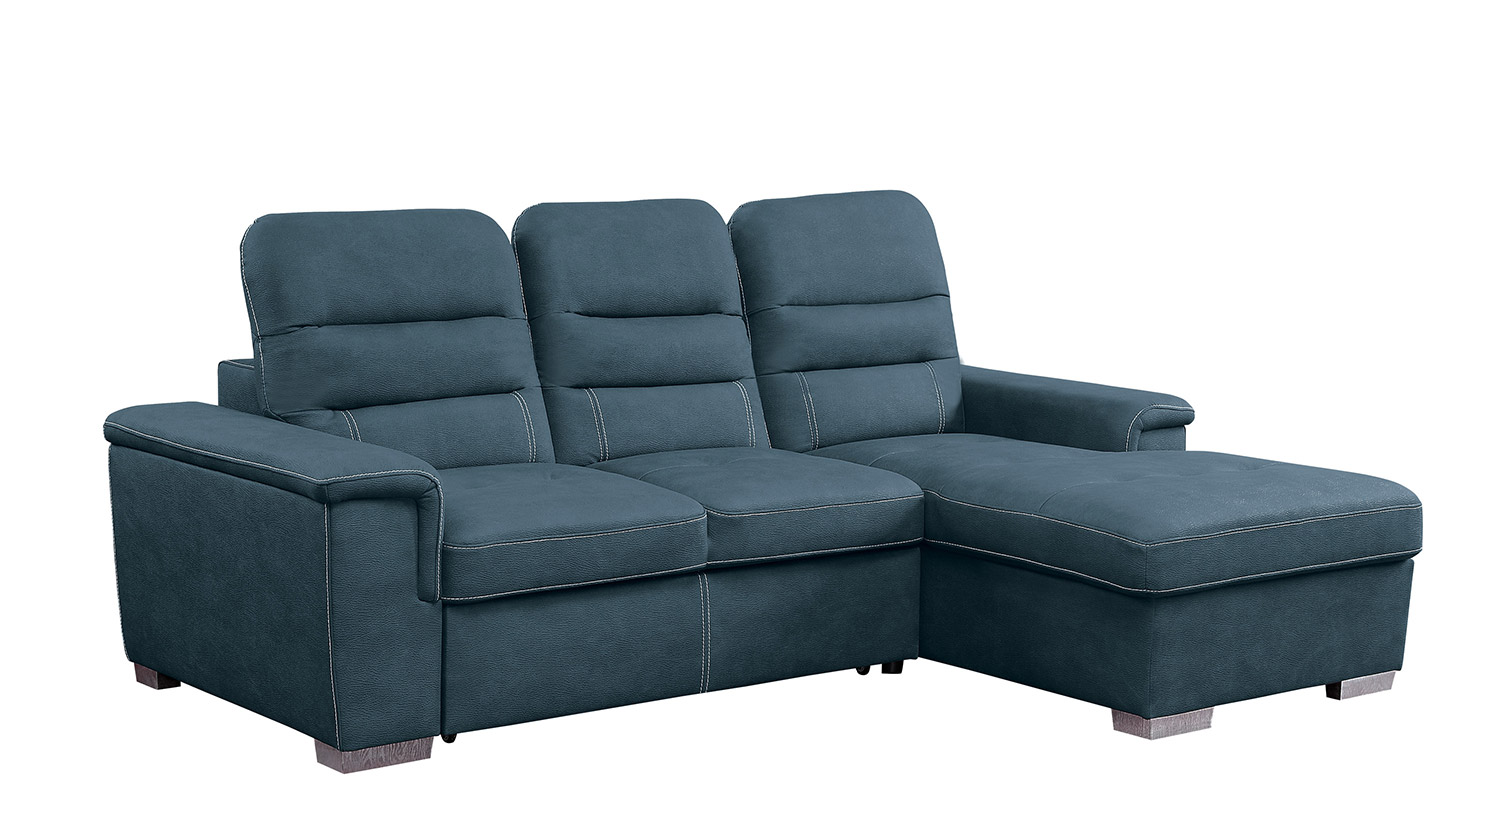 Homelegance Alfio Sectional with Pull-out Bed and Hidden Storage - Blue